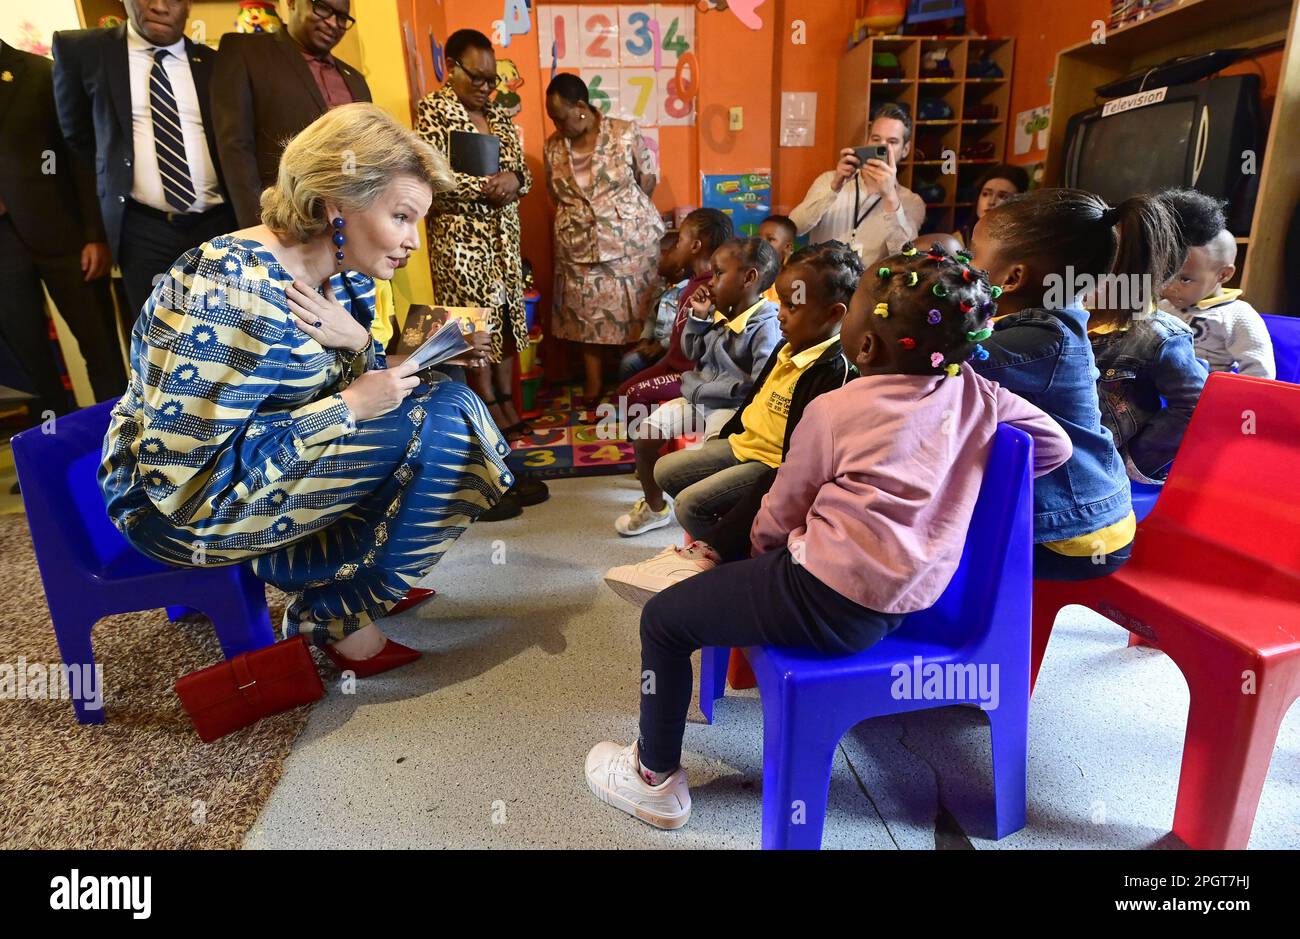 Johannesburg South Africa 24th Mar 2023 Queen Mathilde Of Belgium Meets Children During A Visit Of The Emuseni Day Care Centre In Johannesburg During A State Visit Of The Belgian Royal Couple To The Republic Of South Africa Friday 24 March 2023 Belga Photo Pool Didier Lebrun Credit Belga News Agencyalamy Live News 2PGT7HJ 